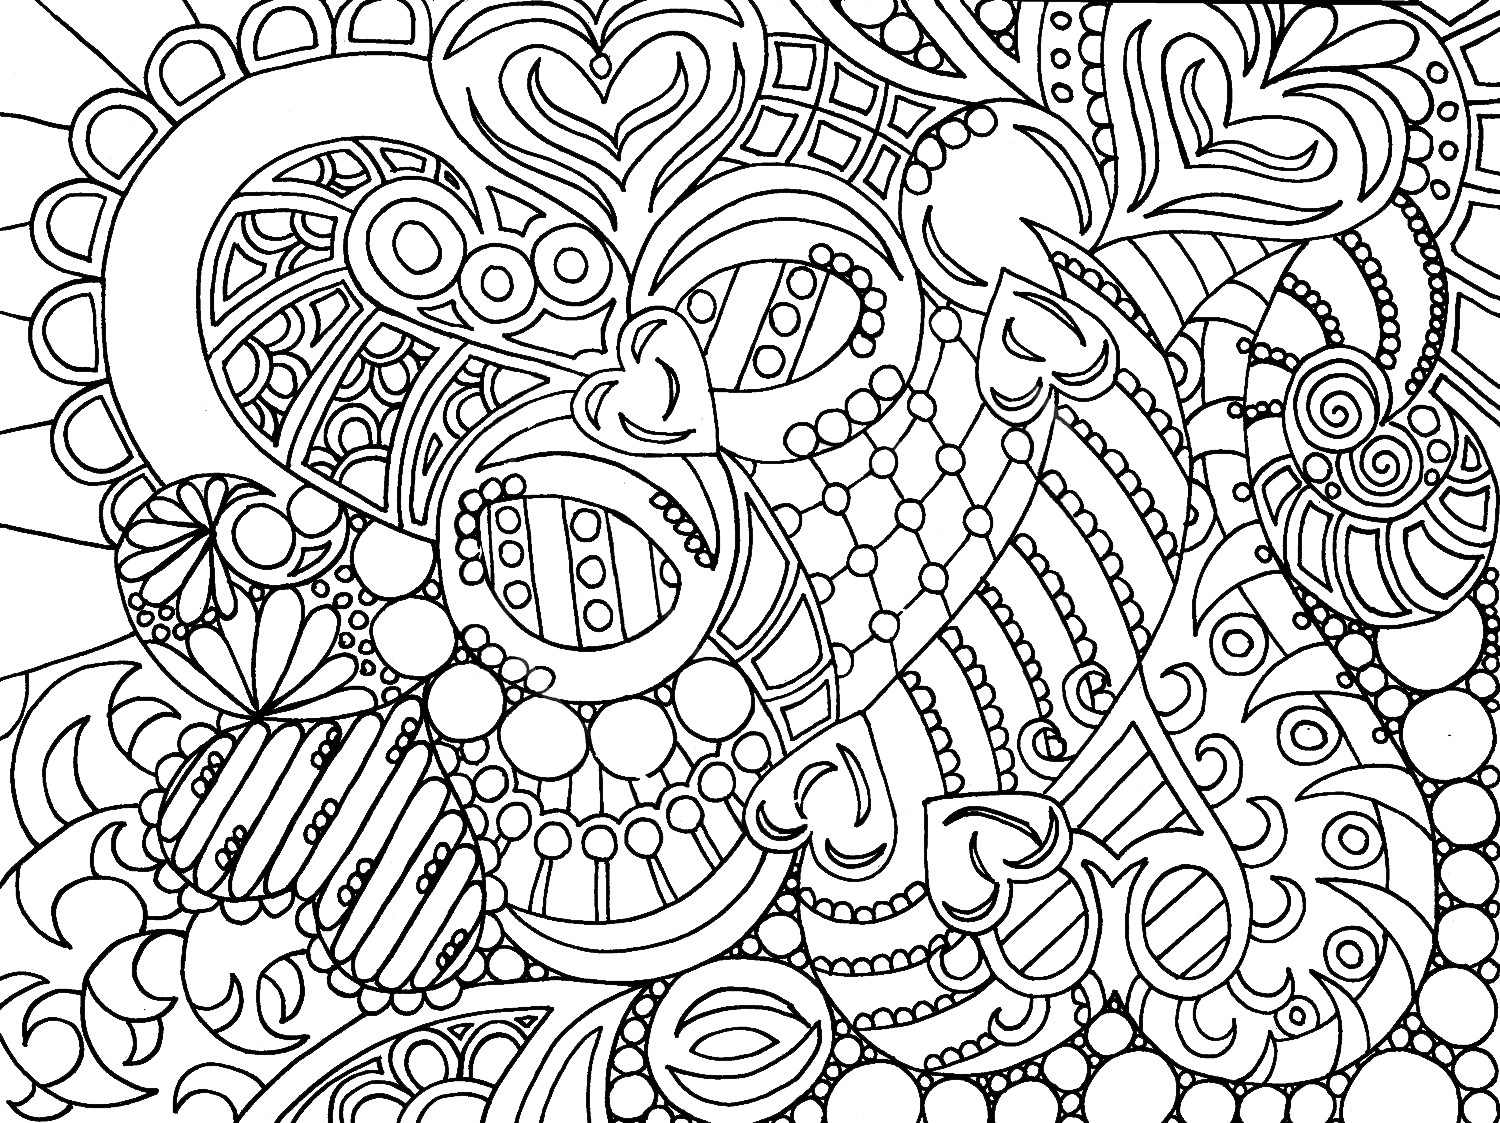 Coloring Pages For Adults Free
 free coloring pages for adults